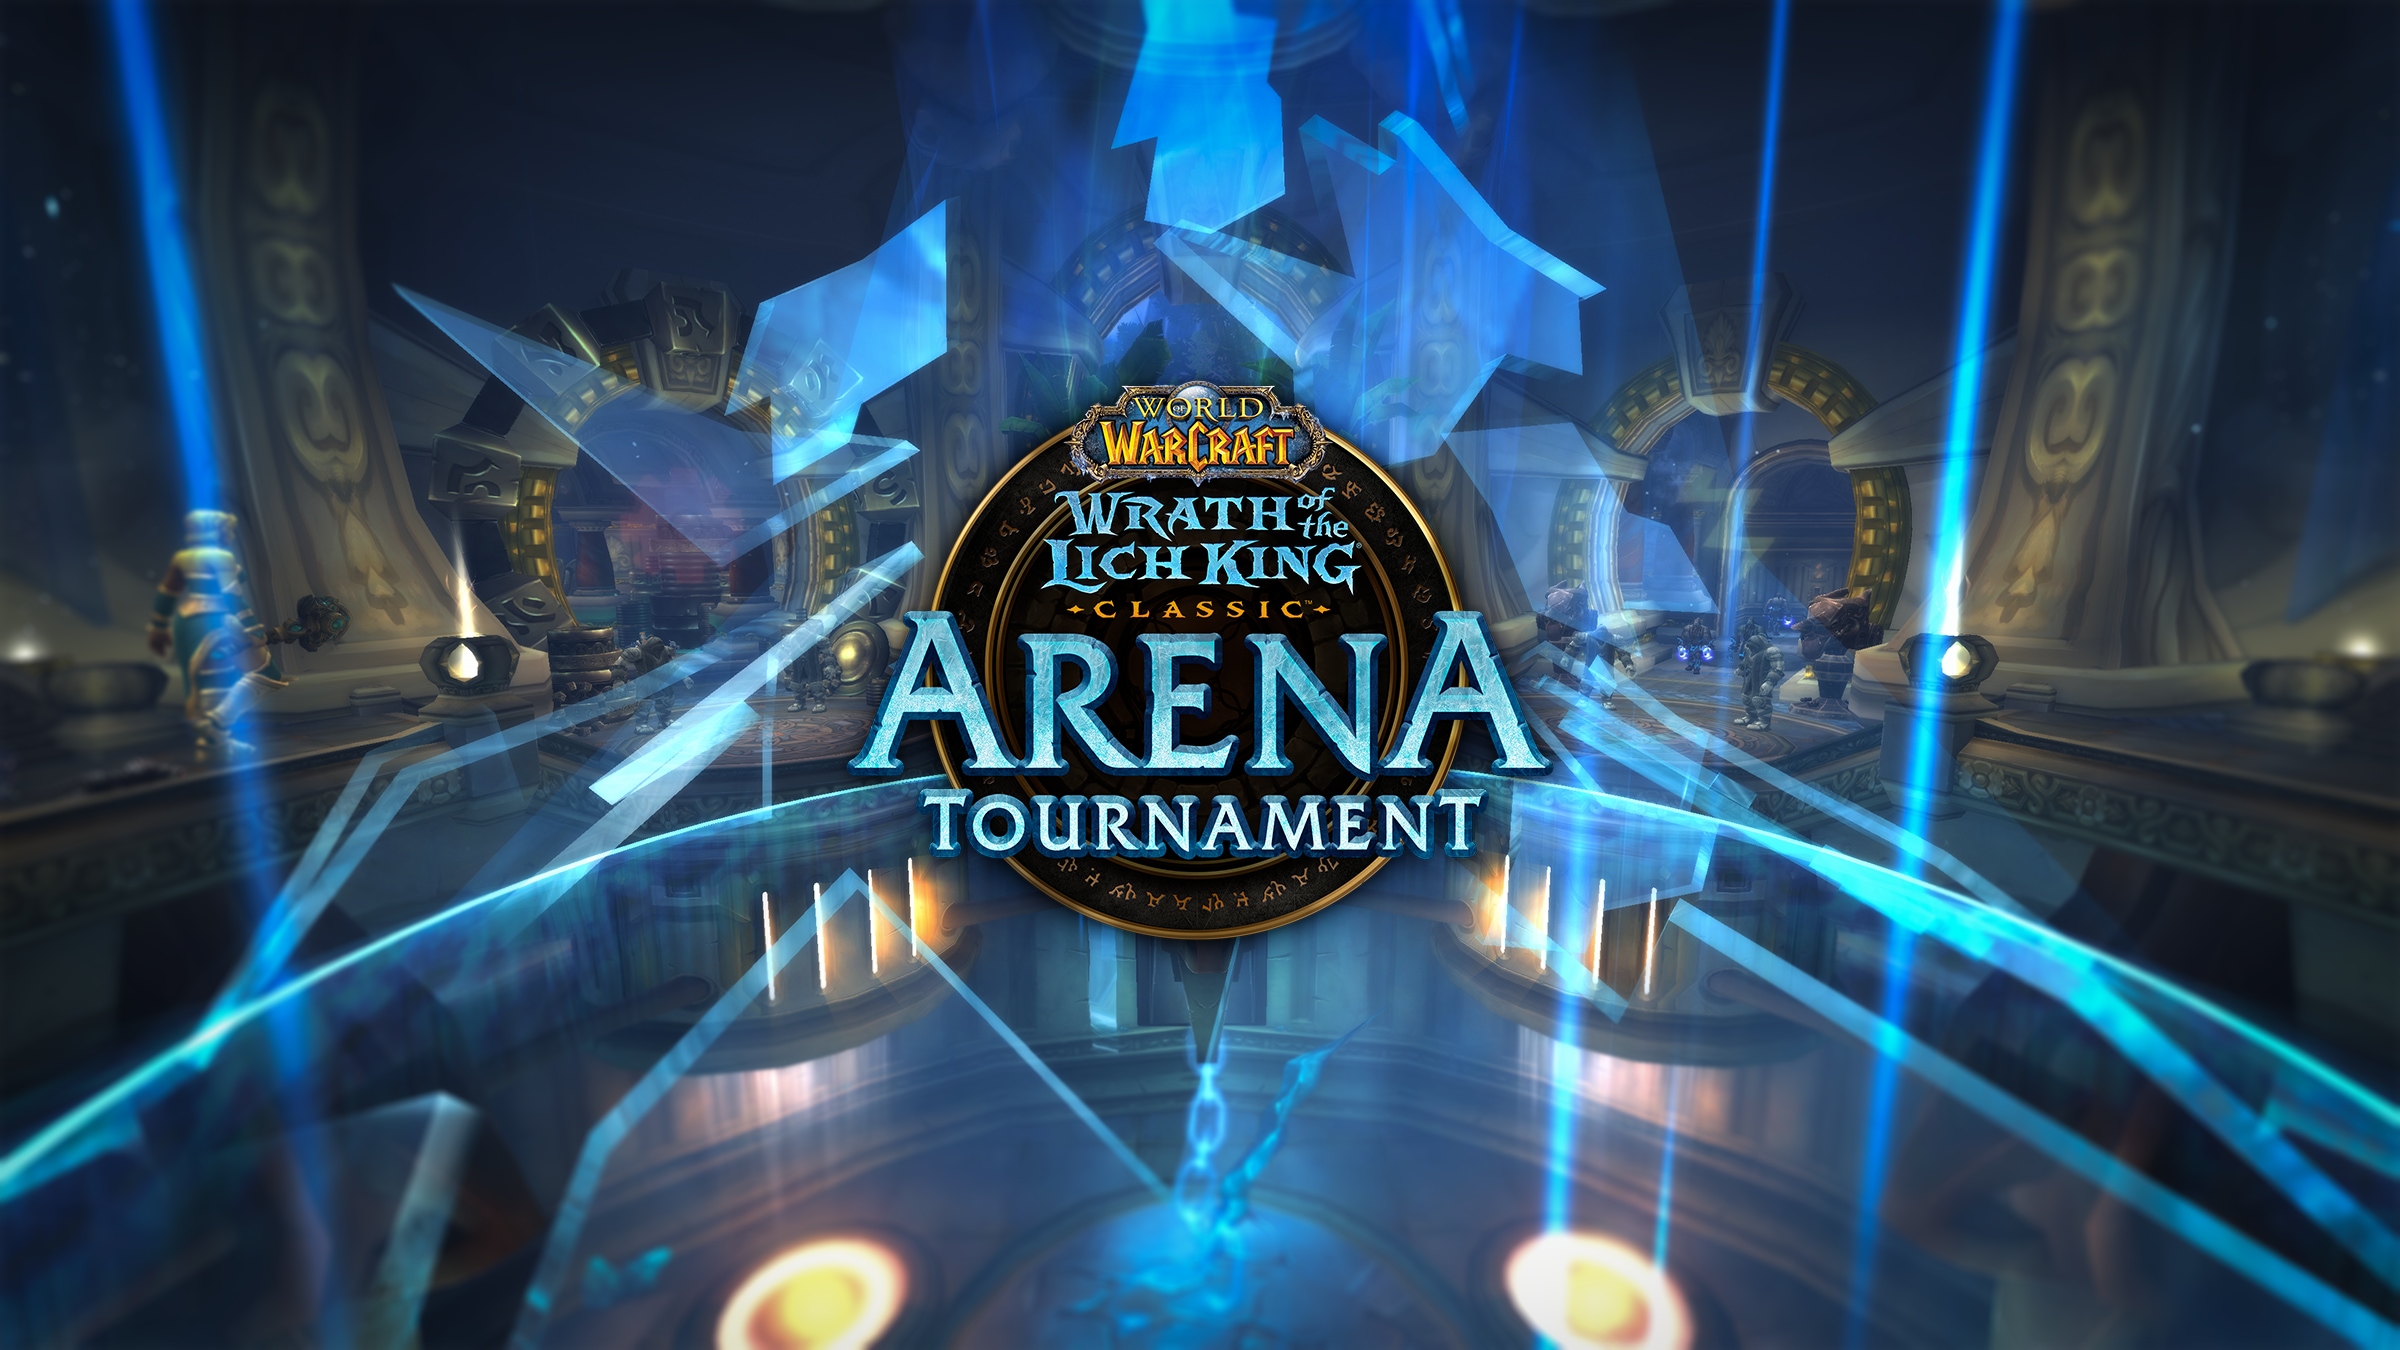 The Classic Arena Tournament Viewers Guide